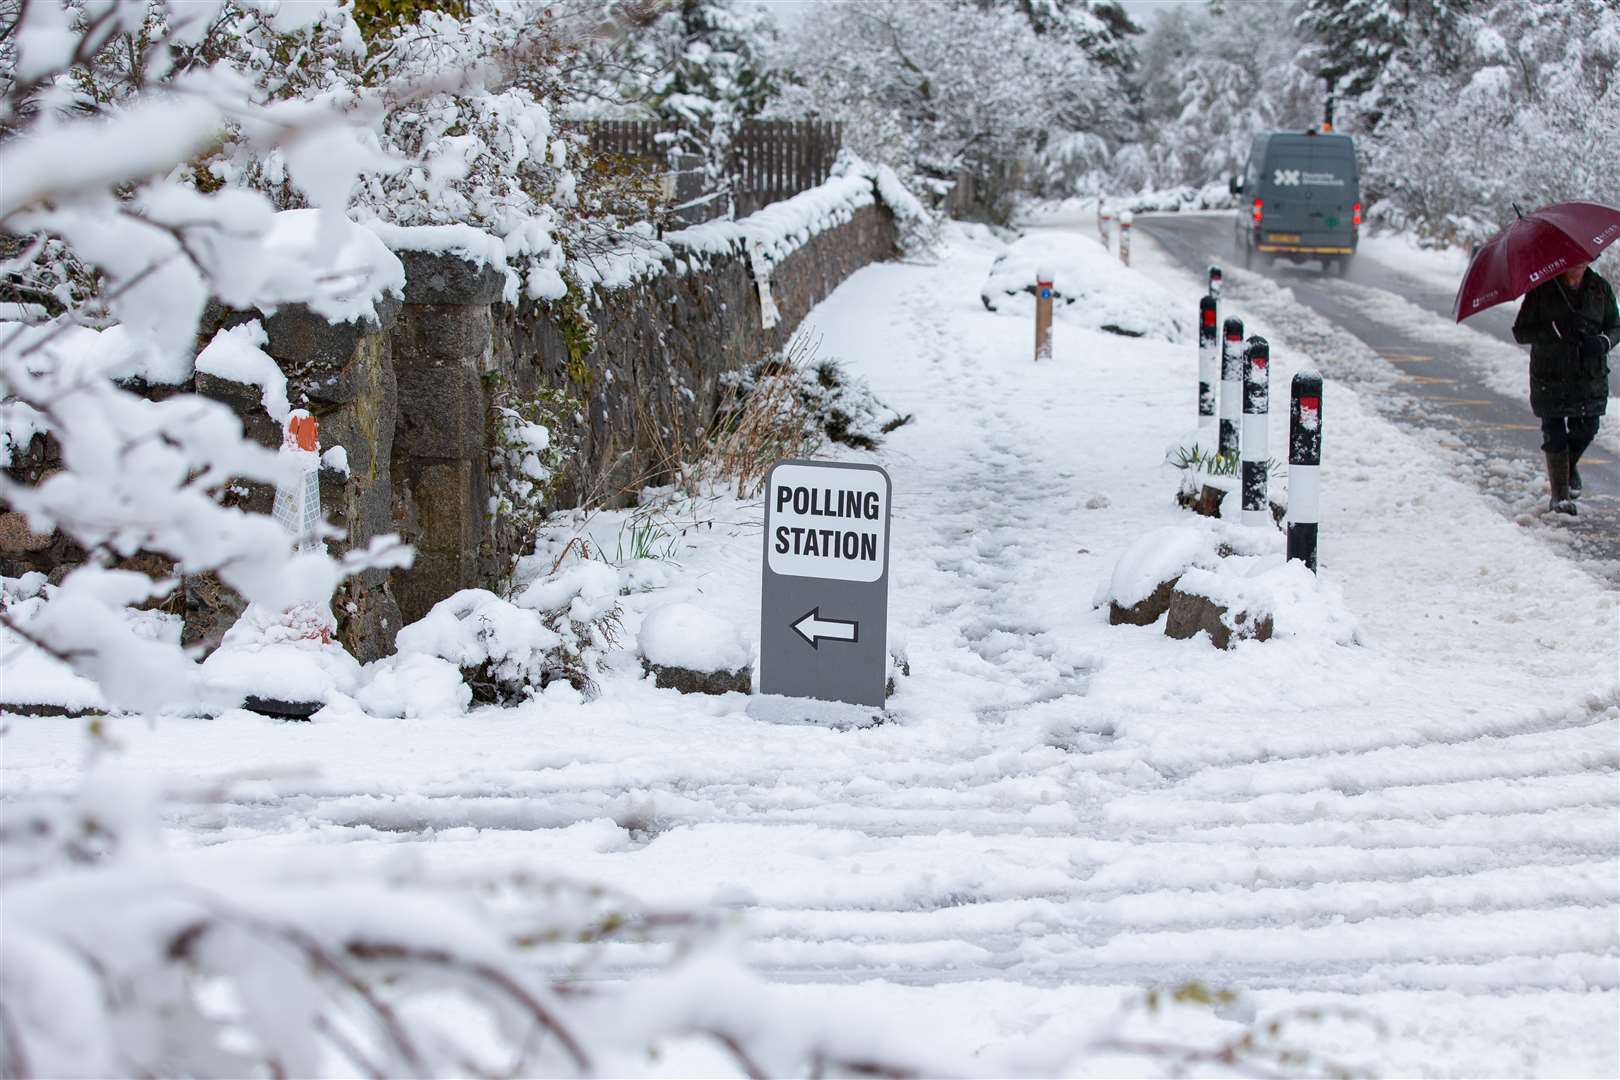 Voters in the village of Farr, near Inverness, had to contend with snow on their way to the polling station on Thursday morning (Paul Campbell/PA)